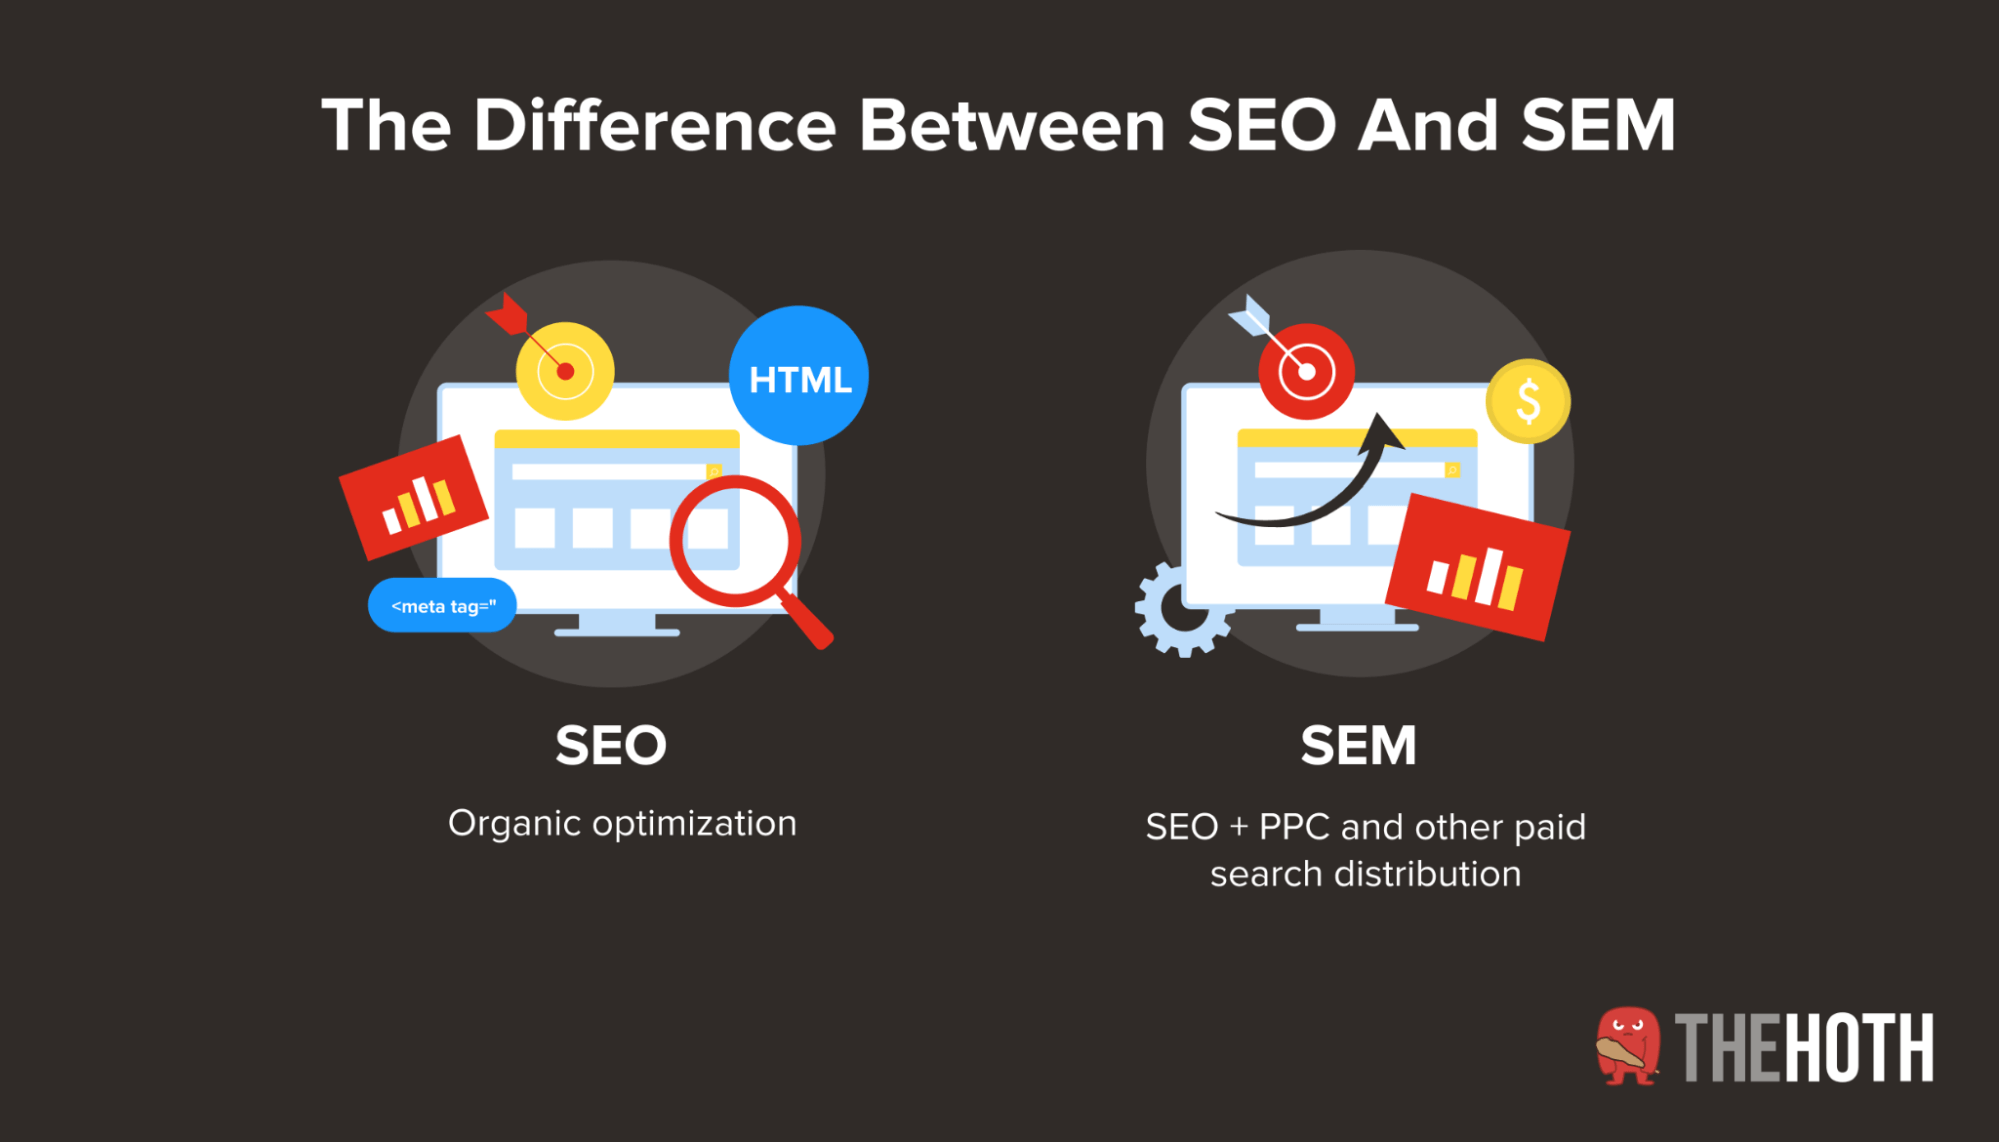 Table outlining the difference between SEO and SEM